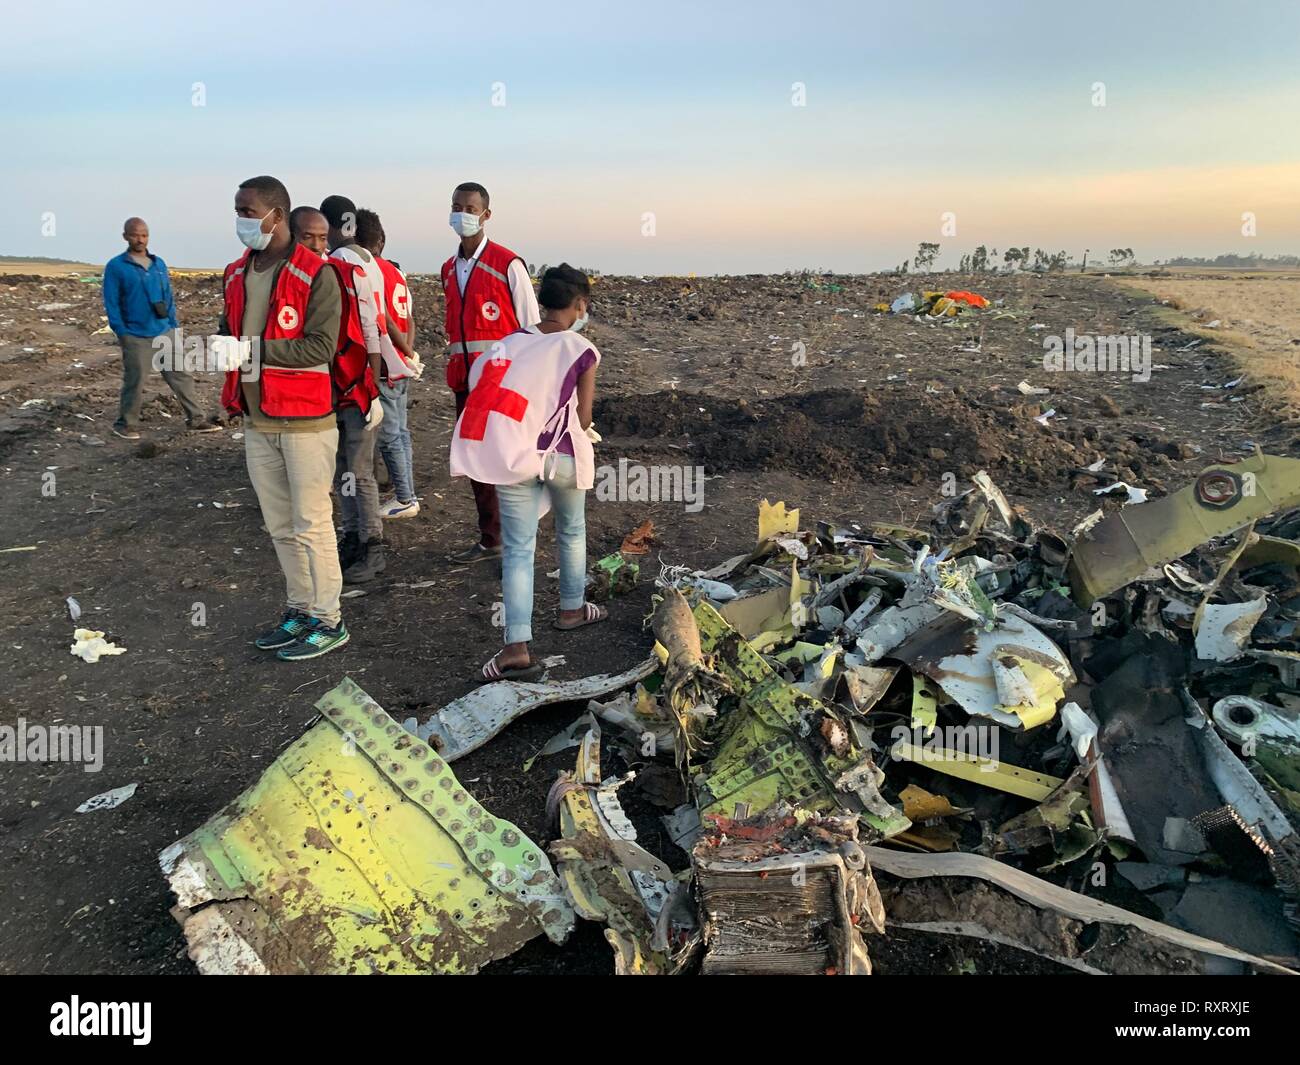 (190311) -- BEIJING, March 11, 2019 (Xinhua) -- Rescuers work beside the wreckage of an Ethiopian Airlines' aircraft at the crash site, some 50 km east of Addis Ababa, capital of Ethiopia, on March 10, 2019. All 157 people aboard Ethiopian Airlines flight were confirmed dead as Africa's fastest growing airline witnessed the worst-ever incident in its history. The incident on Sunday, which involved a Boeing 737-800 MAX, occurred a few minutes after the aircraft took off from Addis Ababa Bole International Airport to Nairobi, Kenya. It crashed around Bishoftu town, the airline said. (Xinhua/Wang Stock Photo